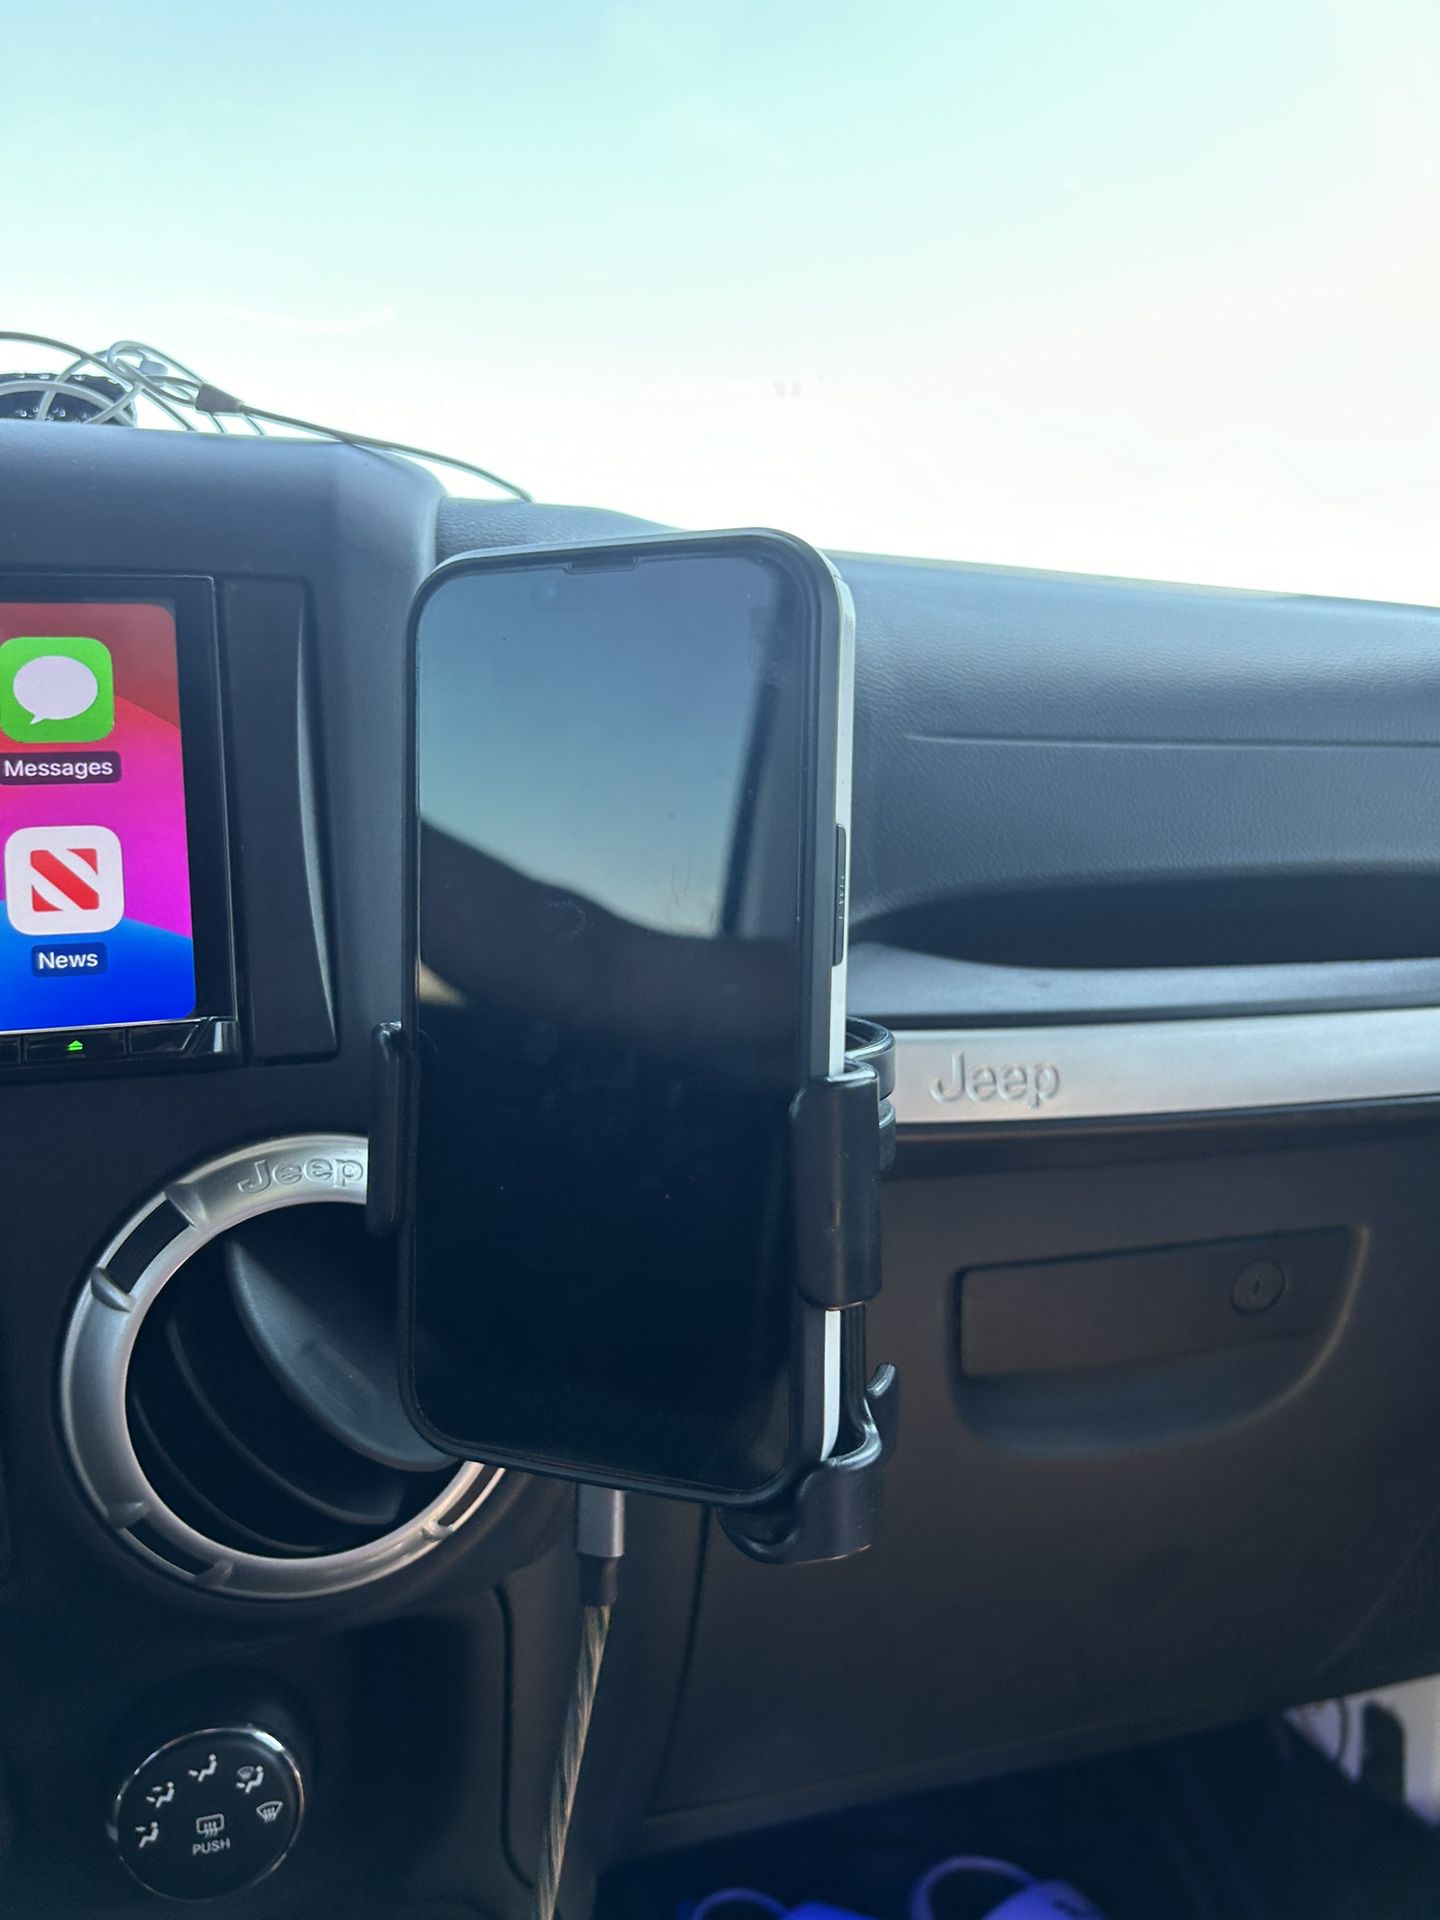 Adjustable Cell Phone/cup Holder For Jeep. 